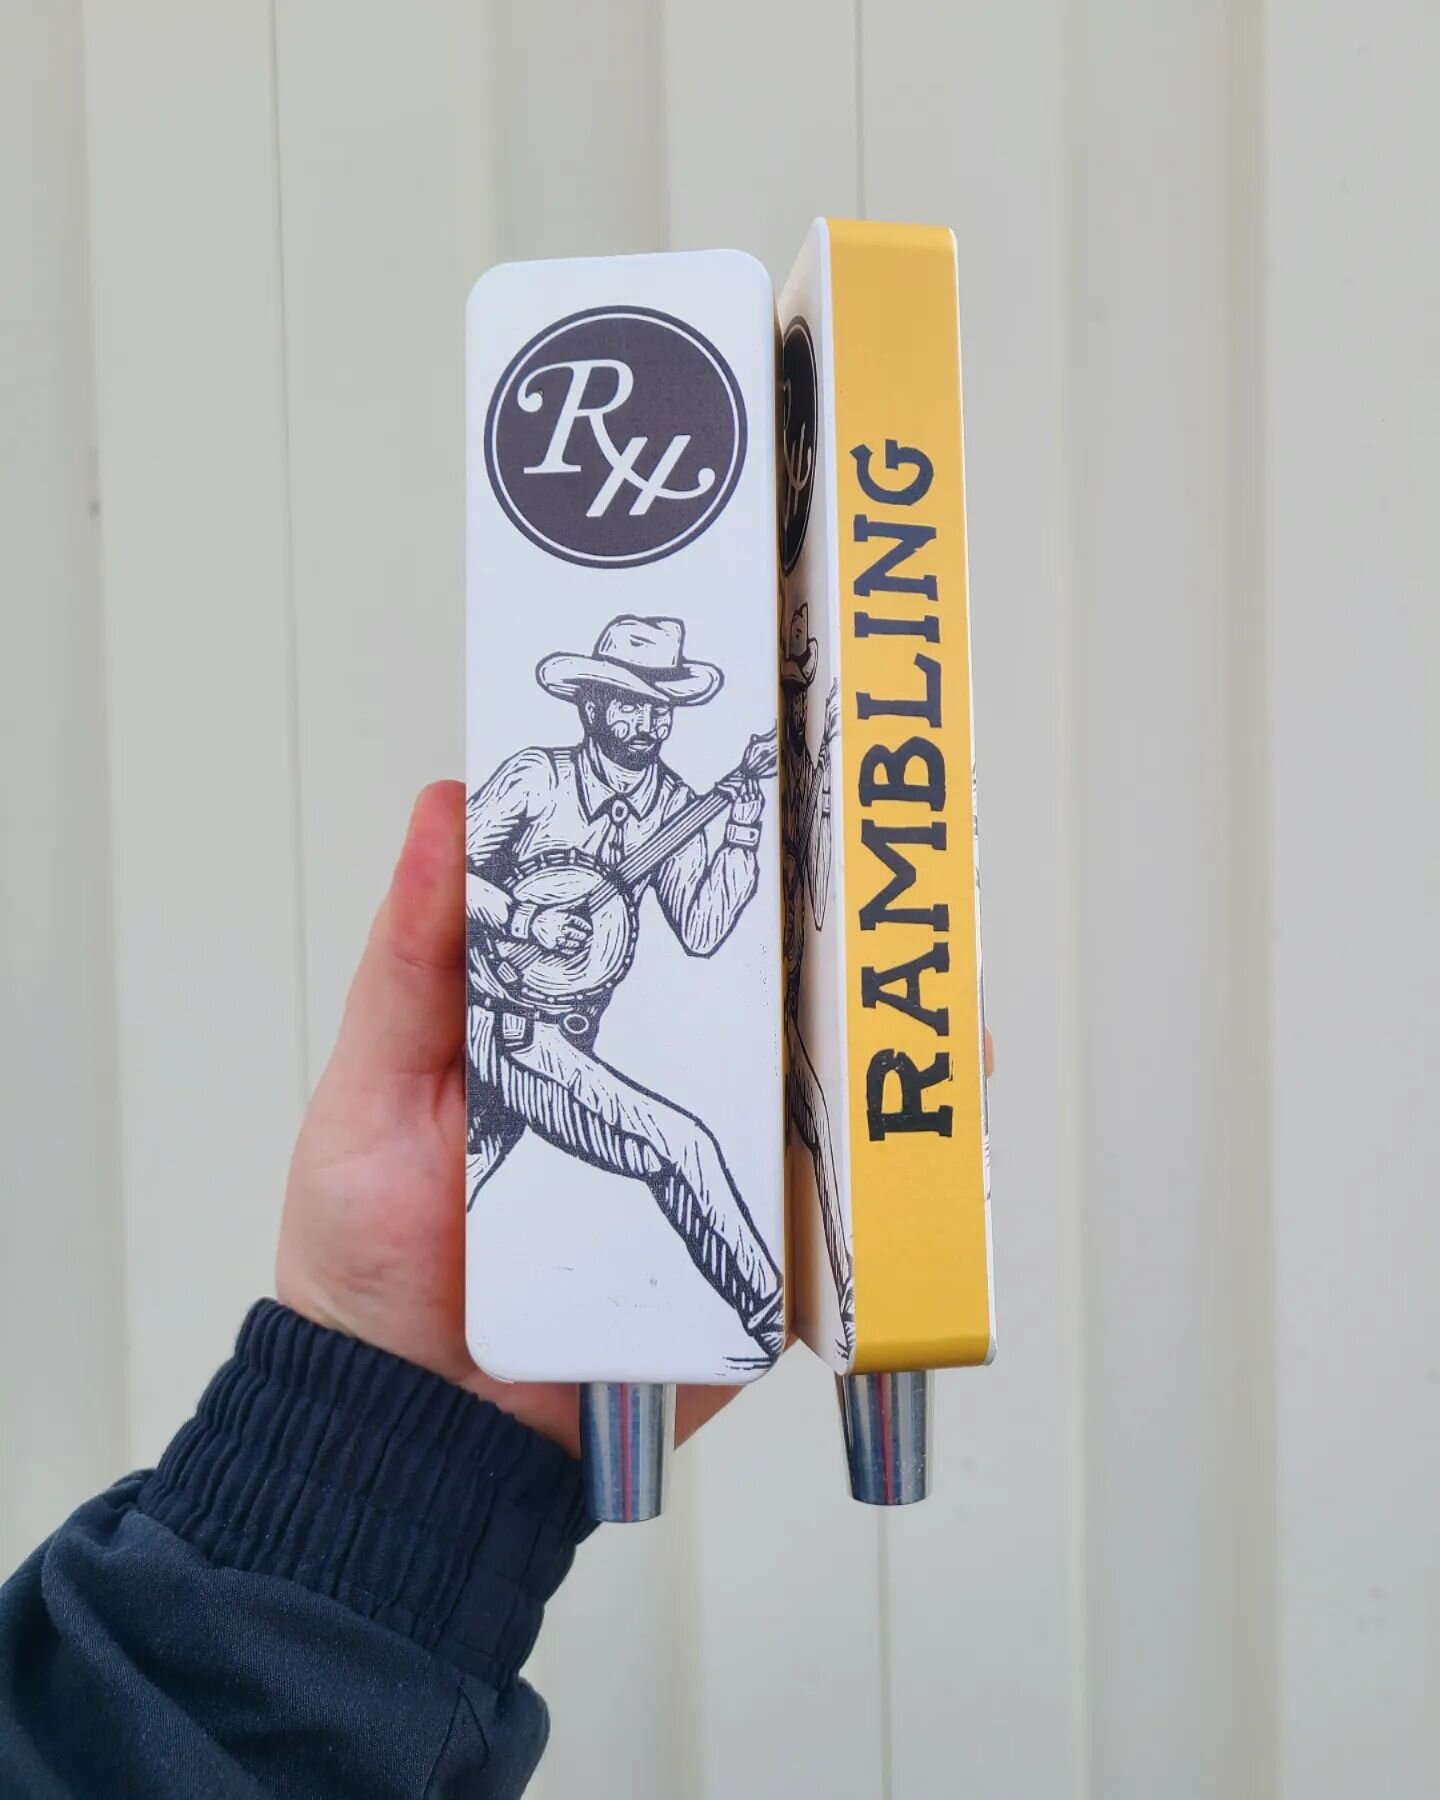 Rambling Soda Ginger Beer can be found on-tap all around Columbus. It's the classic. 😙👌 *chef kiss*

Buuuut we've heard ya and now we're working on getting that good Sarsparilla Root Beer on-tap at your favorite watering holes around town too! Righ